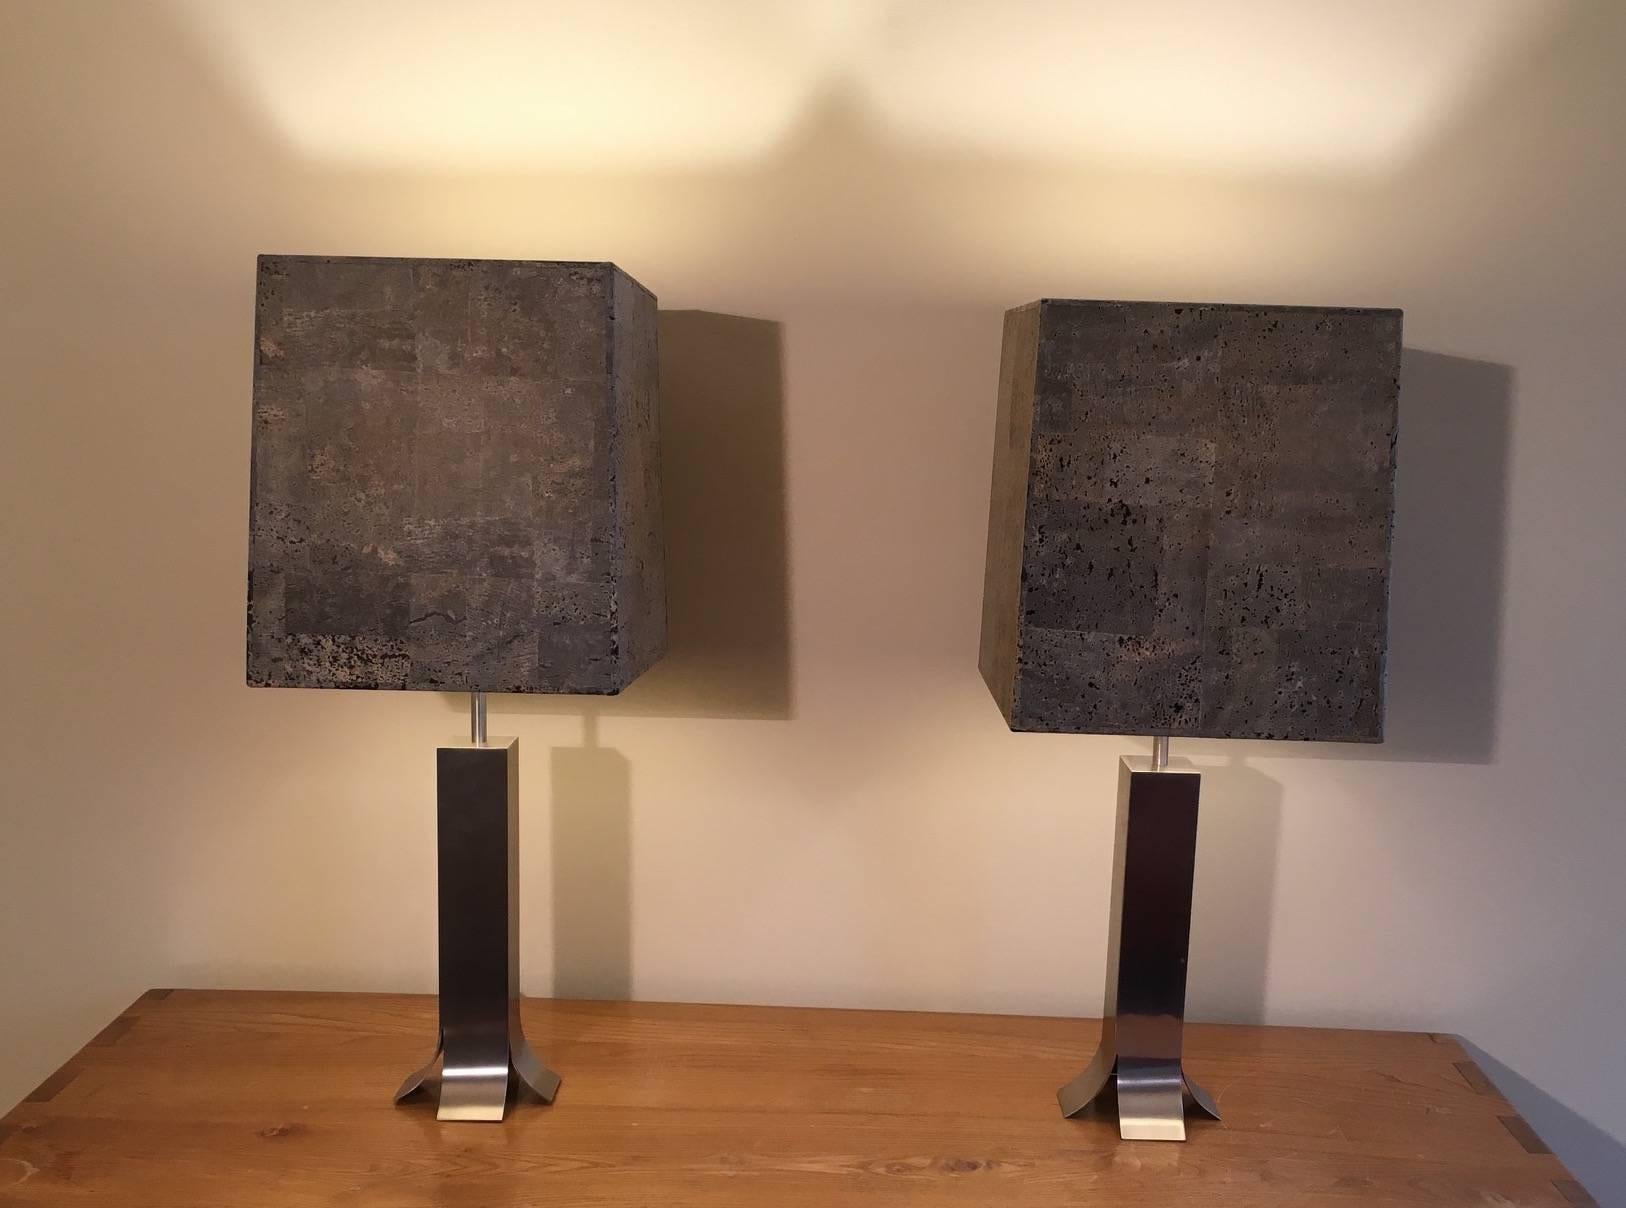 Guy Lefèvre pair of lamps made of brushed steel with original shades.

 Also available and sold separately is a Guy Lefèvre desk made of leather, lacquered wood and accented with brushed steel, as well as Guy Lefèvre Book Shelf made of lacquered